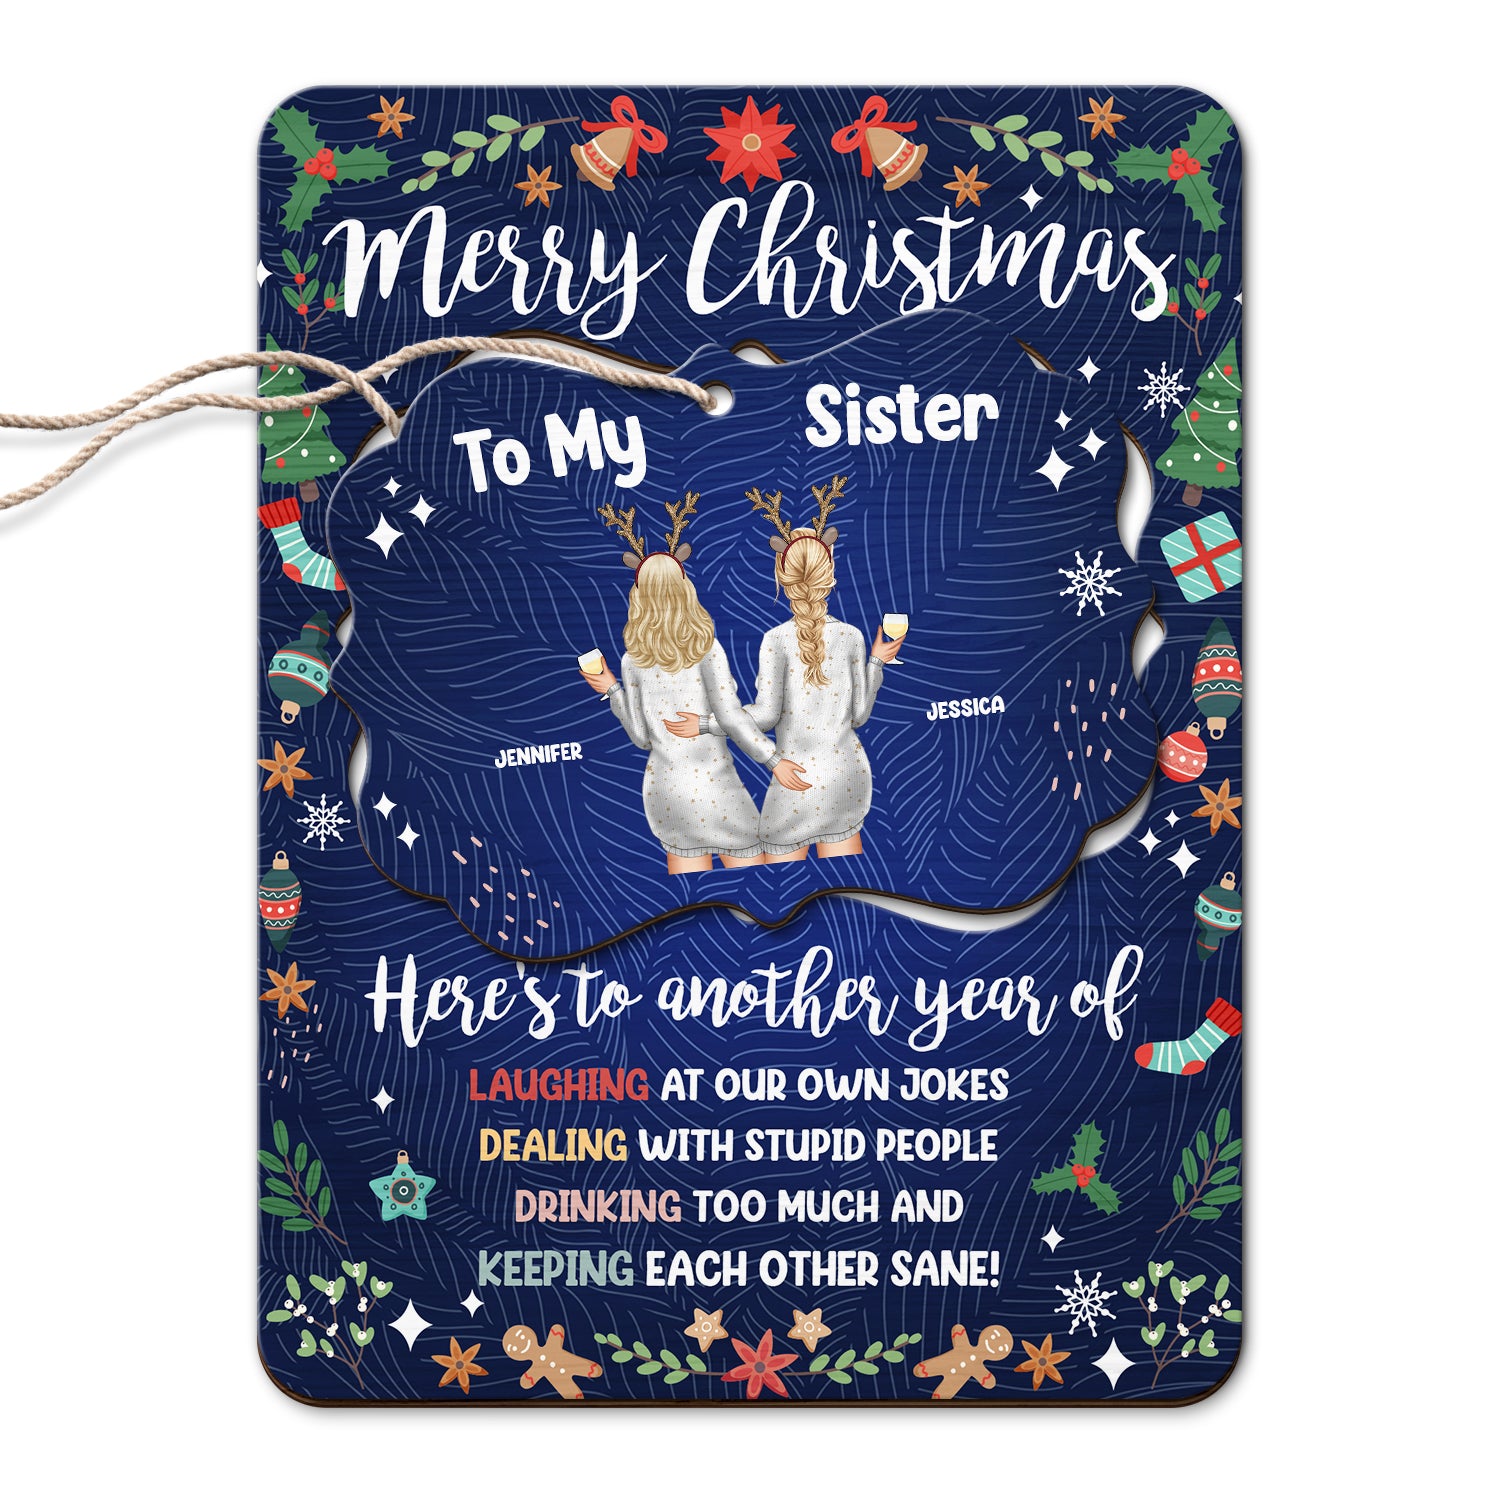 Our Own Jokes - Christmas Gift For Sisters And Best Friends - Personalized Wooden Card With Pop Out Medallion Ornament